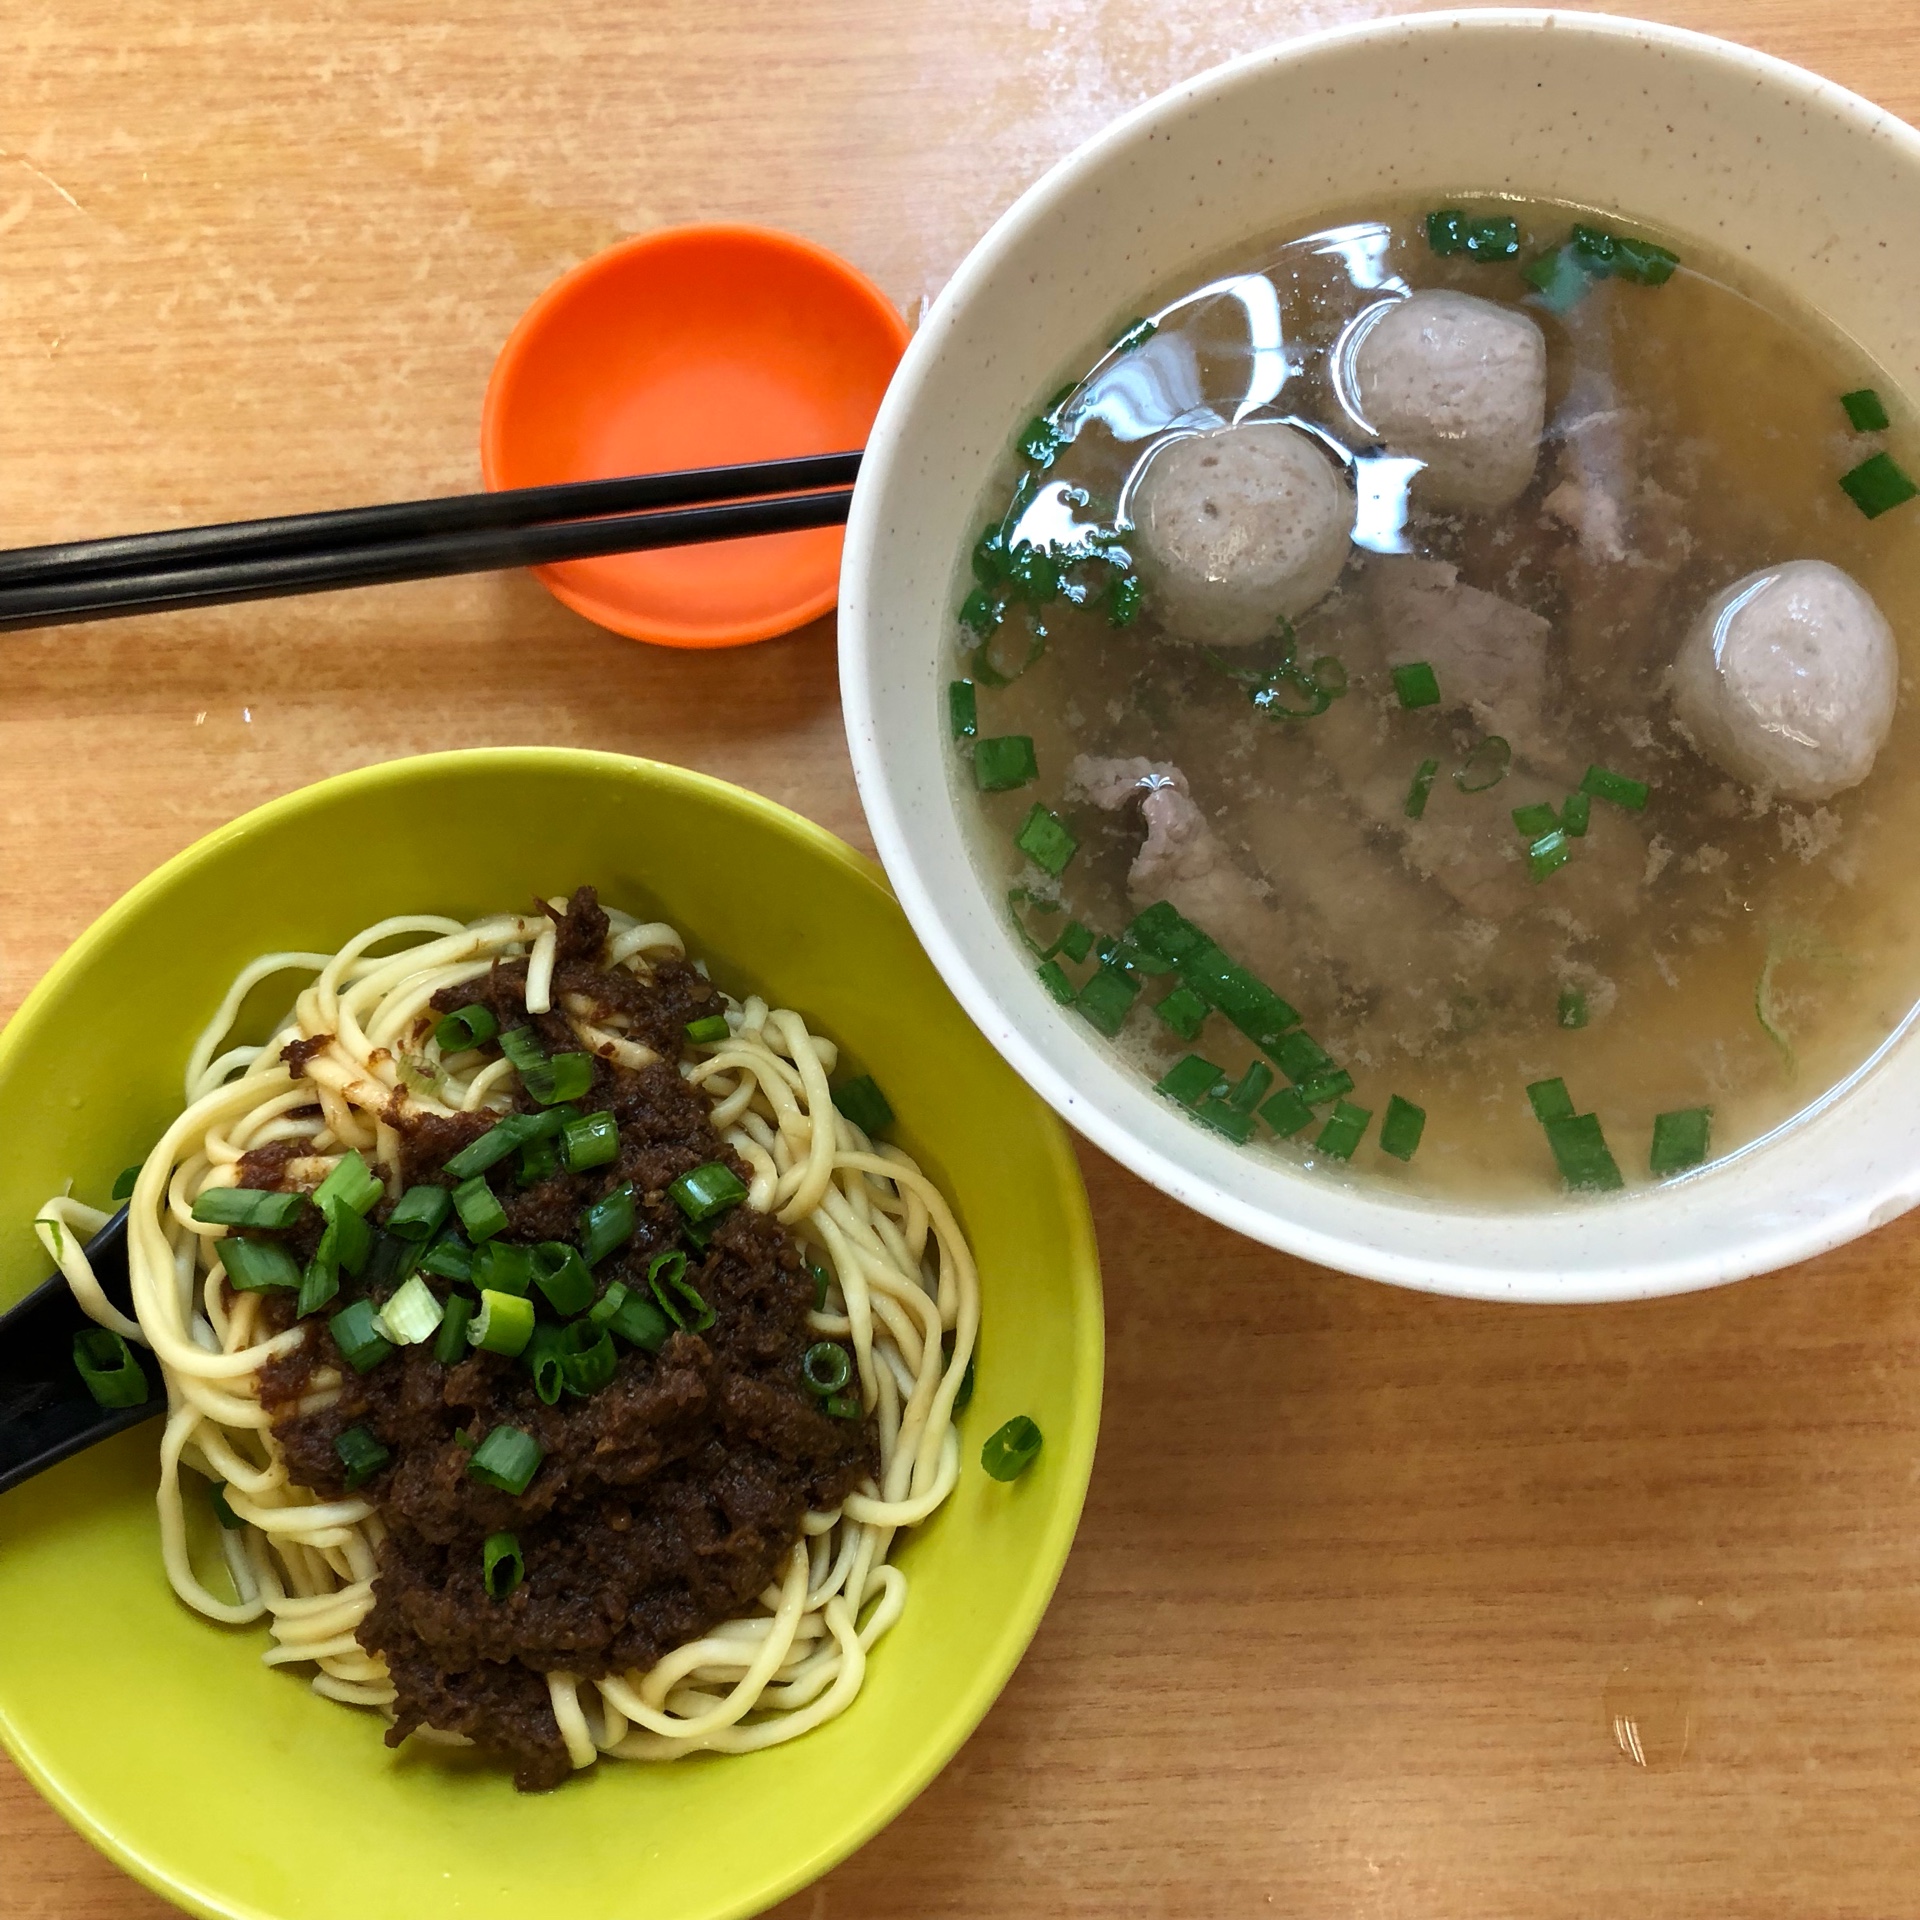 Beef Noodles at Shin Kee Beef Noodles | Burpple